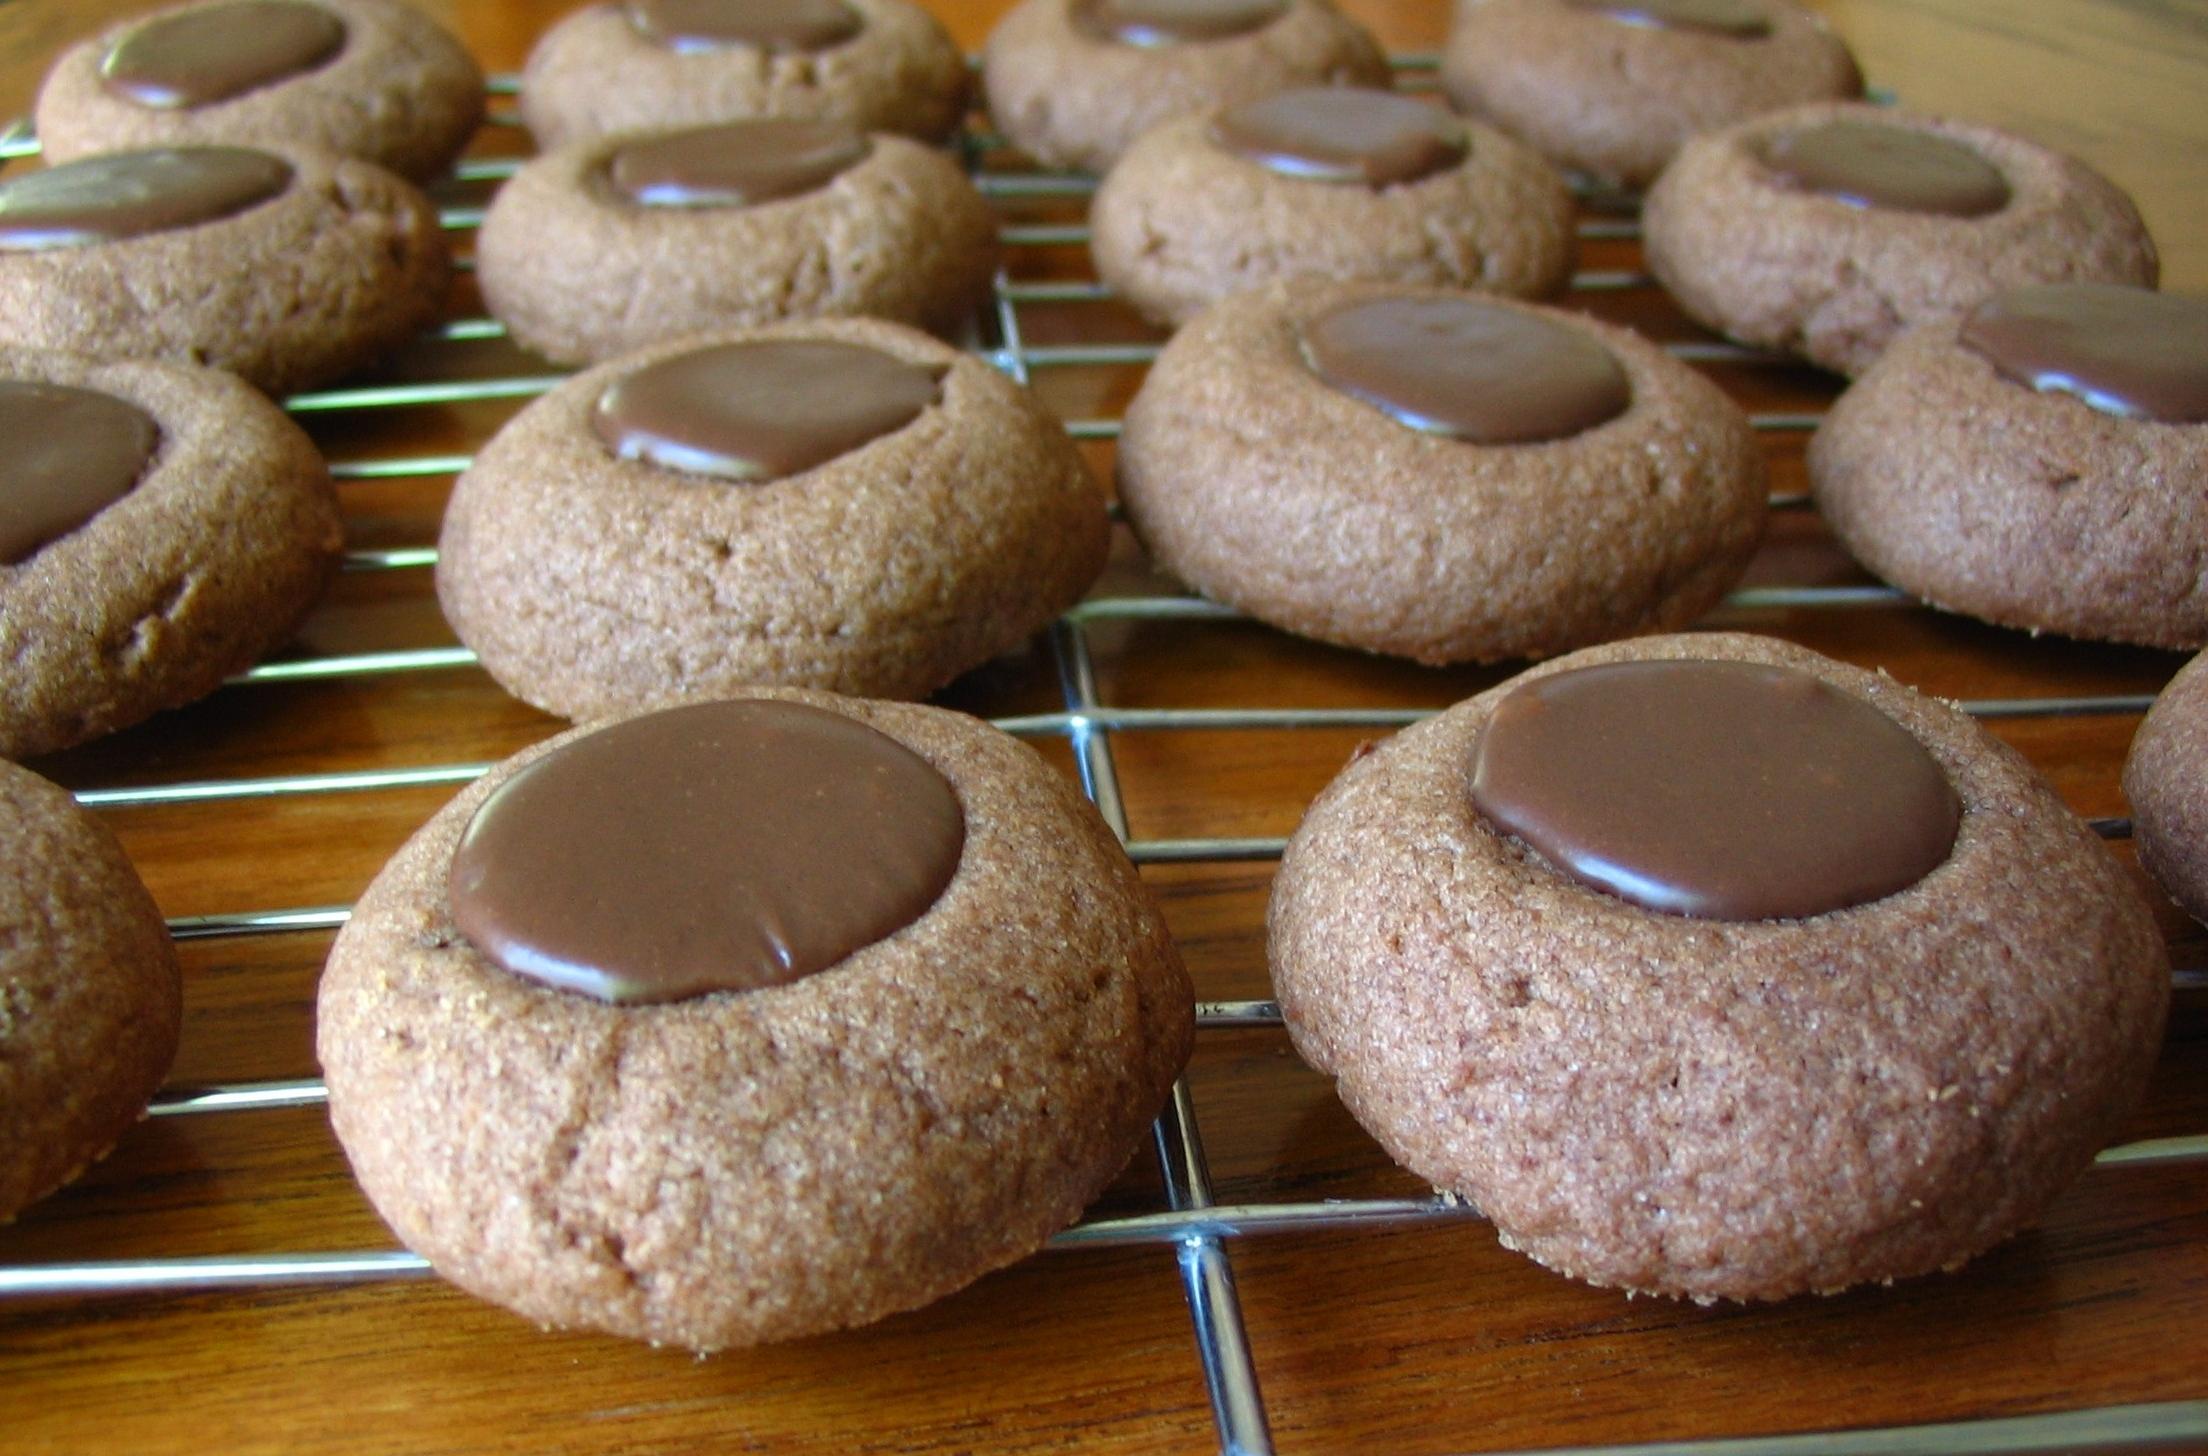  These Espresso Thumbprint Cookies will make you forget about your morning coffee! ☕️🍪